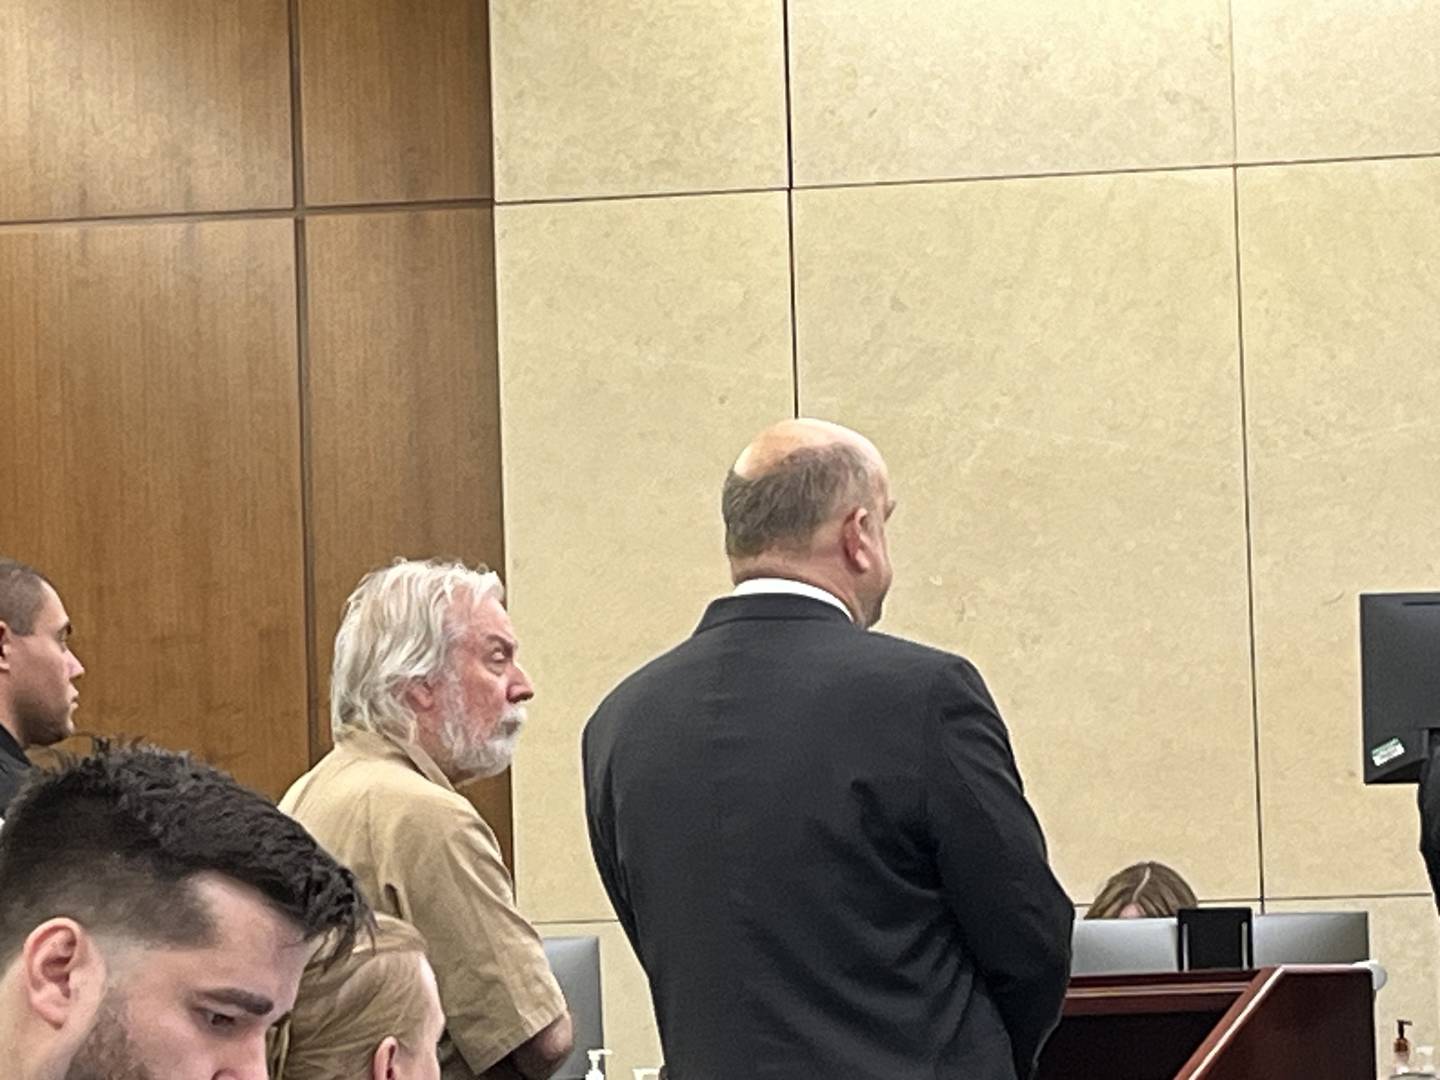 Drew Peterson, a former Bolingbrook police officer, was back in a Will County courtroom on Monday, Feb. 5, 2024. Peterson made his first court appearance since filing a petition seeking to overturn his 2012 conviction for the murder of his third wife Kathleen Savio in 2004.